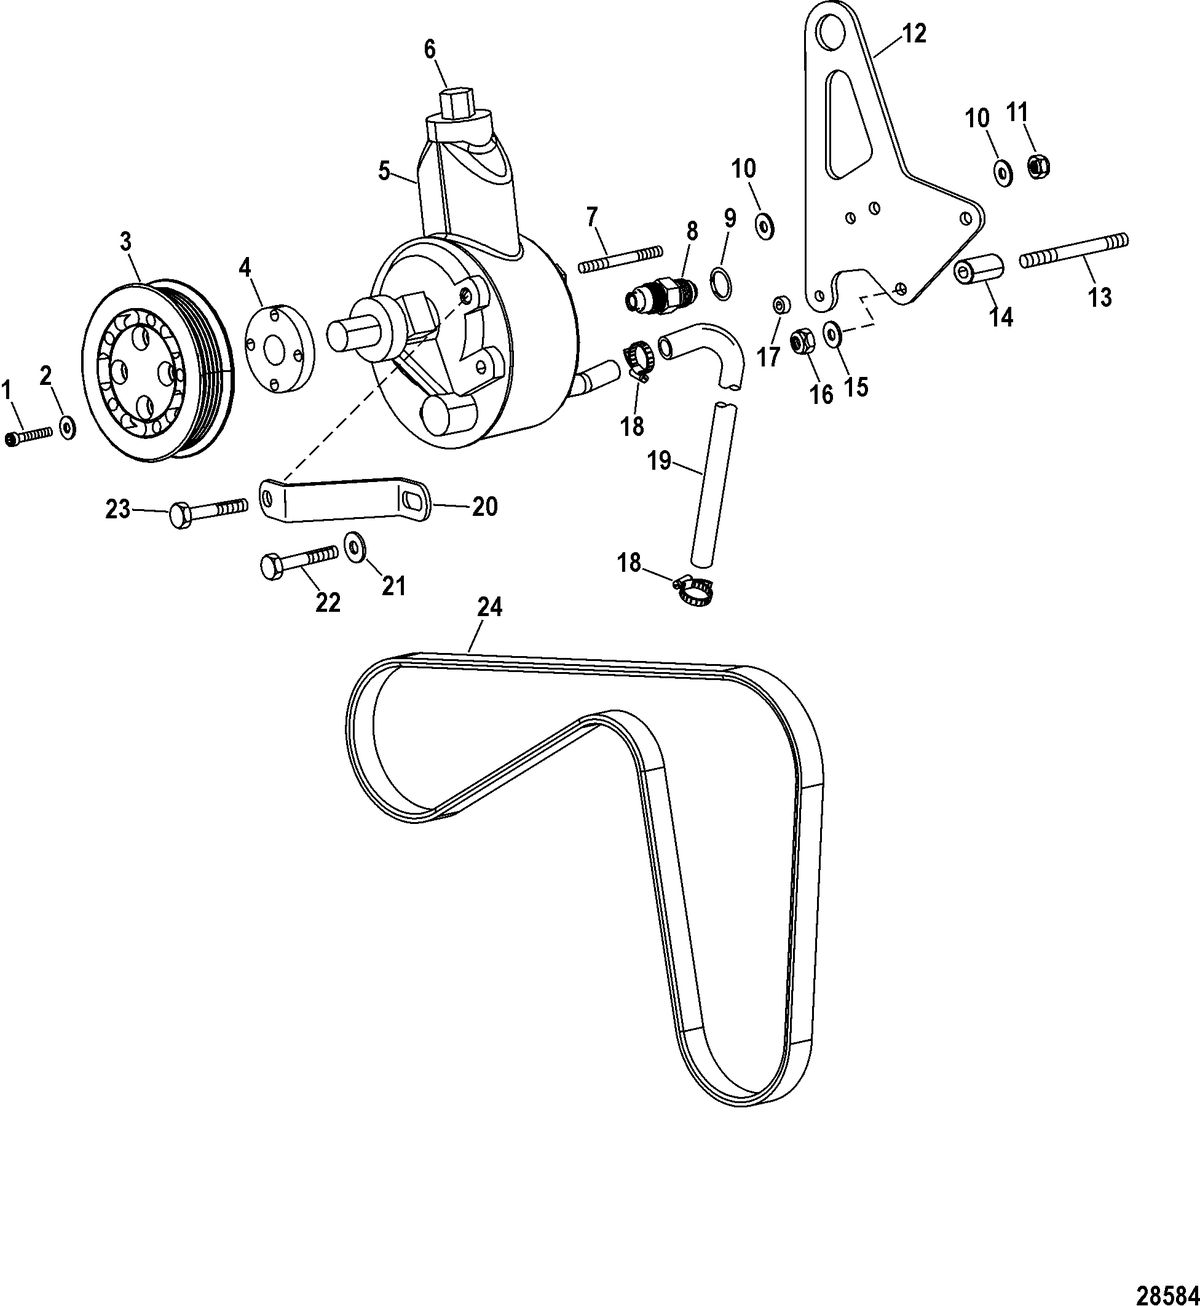 RACE STERNDRIVE 1200 SCI Power-Assisted Steering Components(Design I)